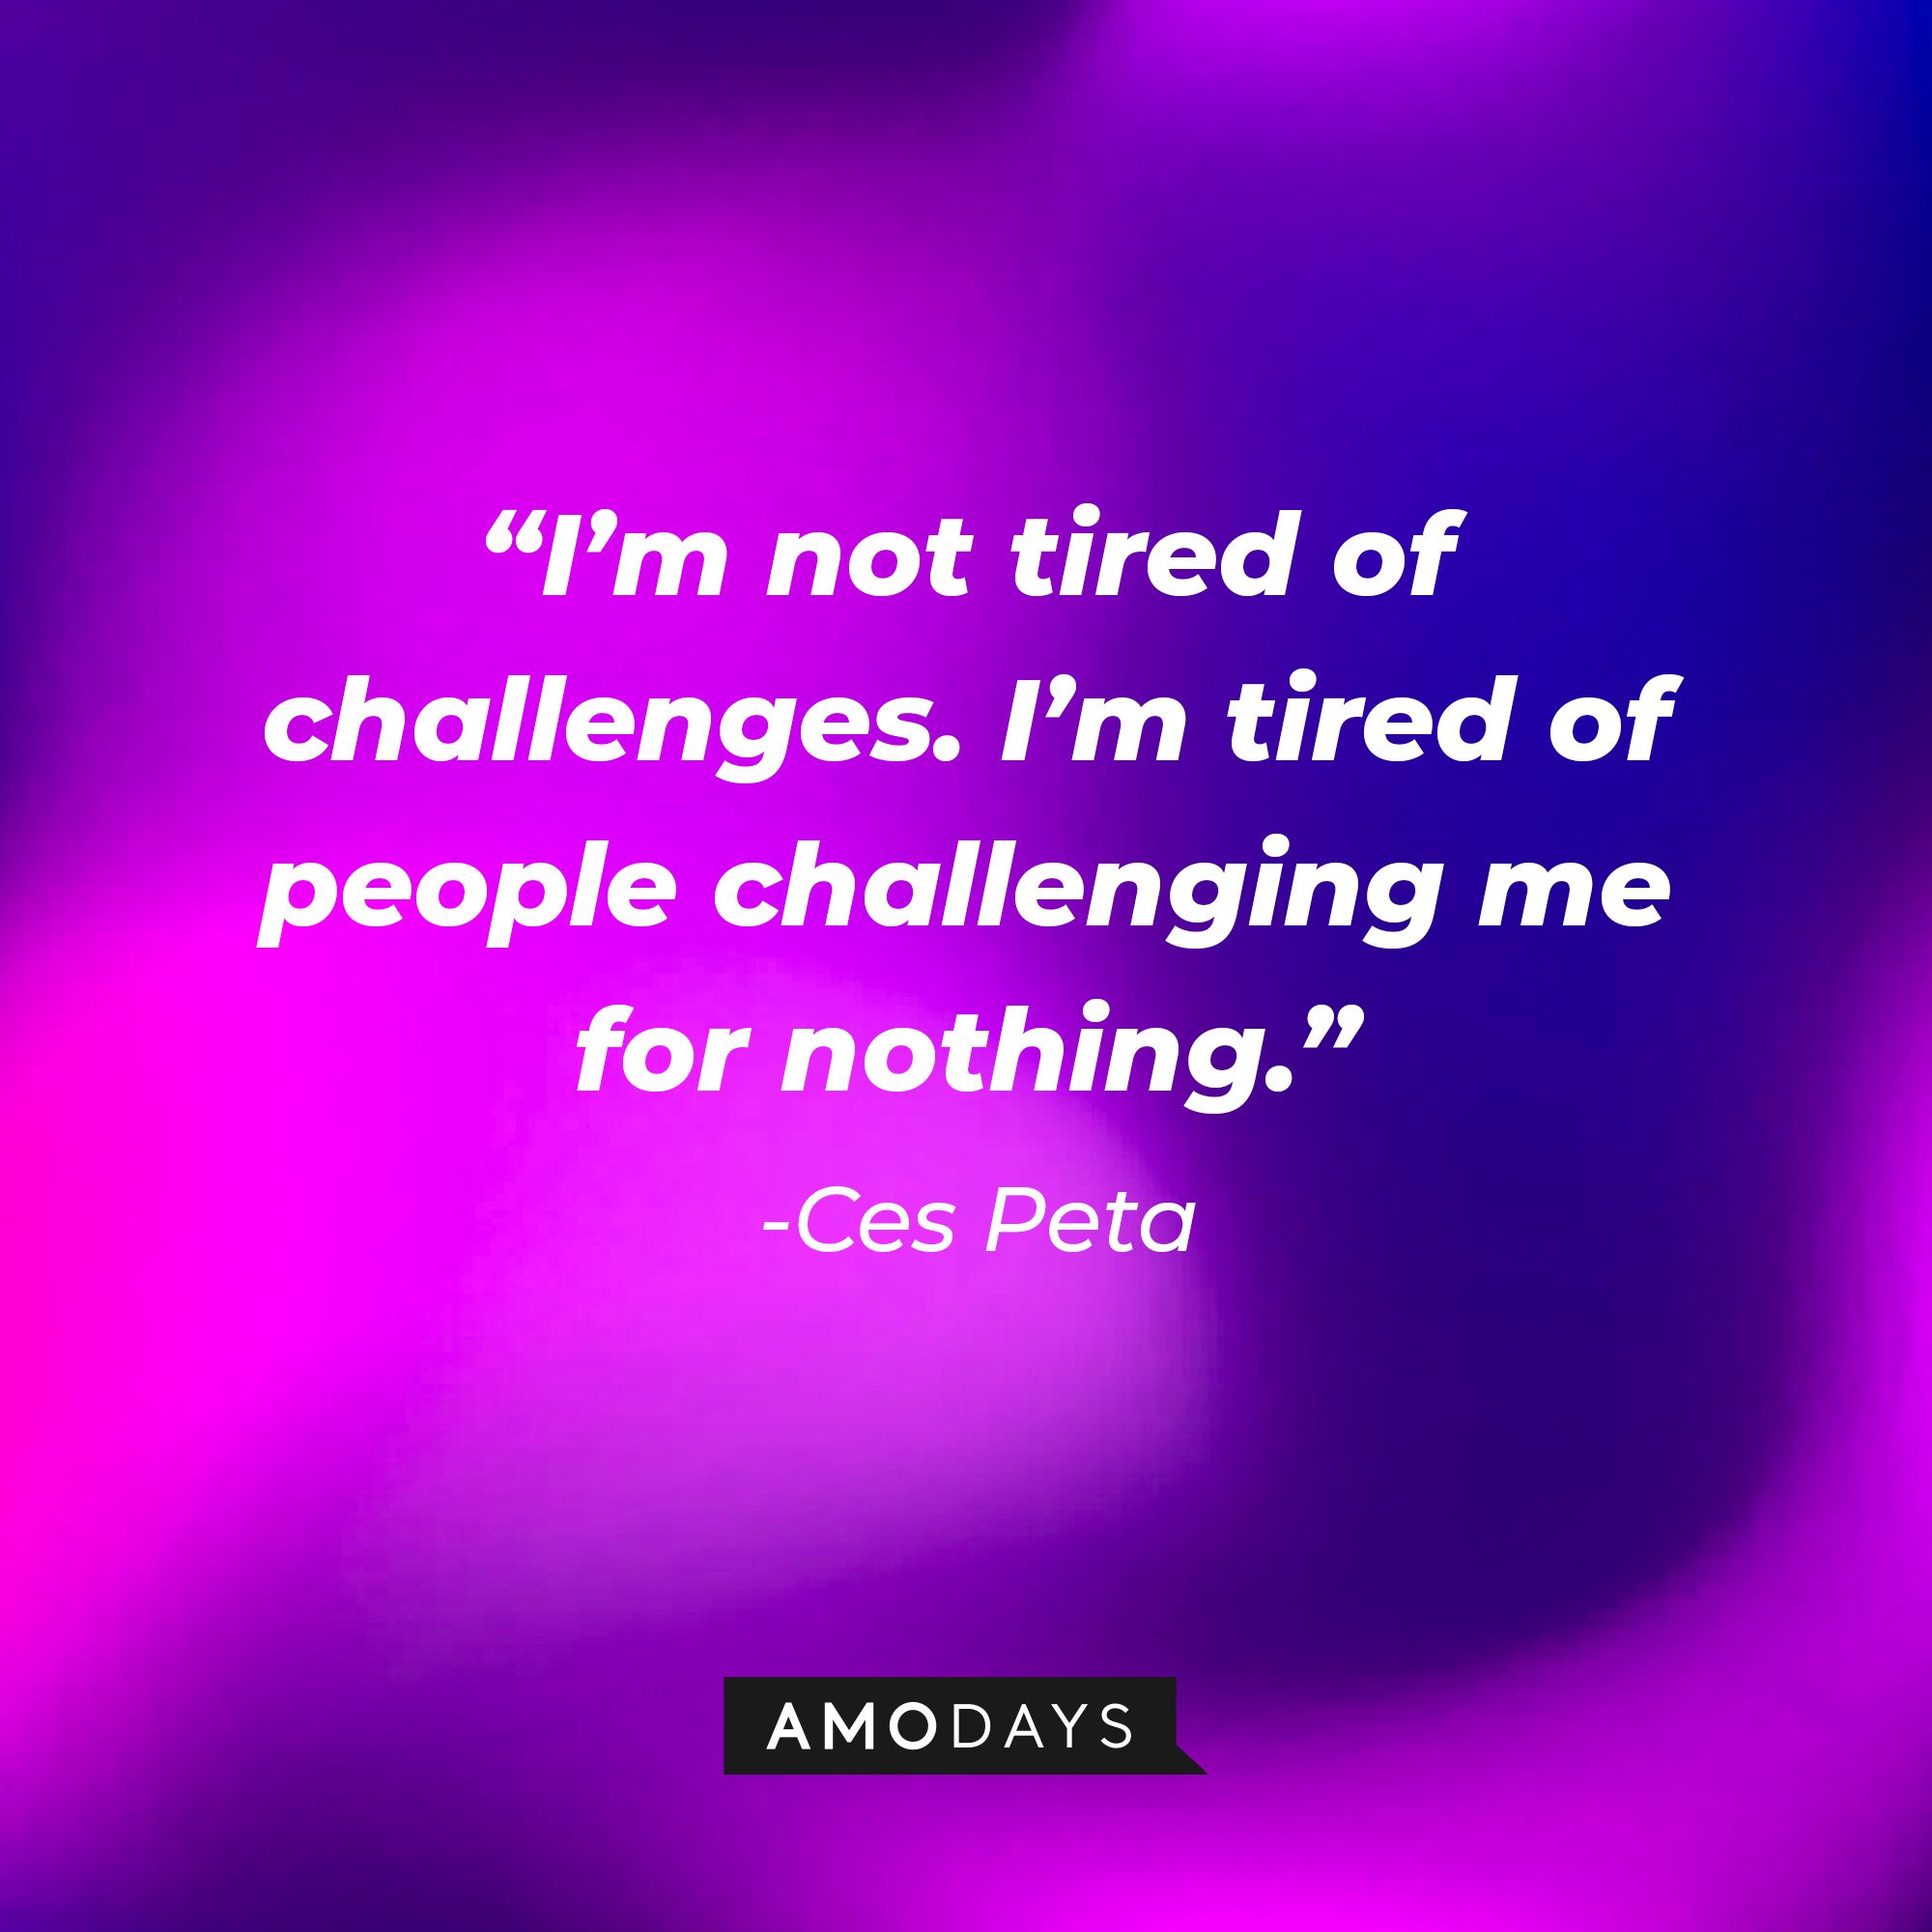  Ces Peta's quote: “I’m not tired of challenges. I’m tired of people challenging me for nothing.” | Image: AmoDays